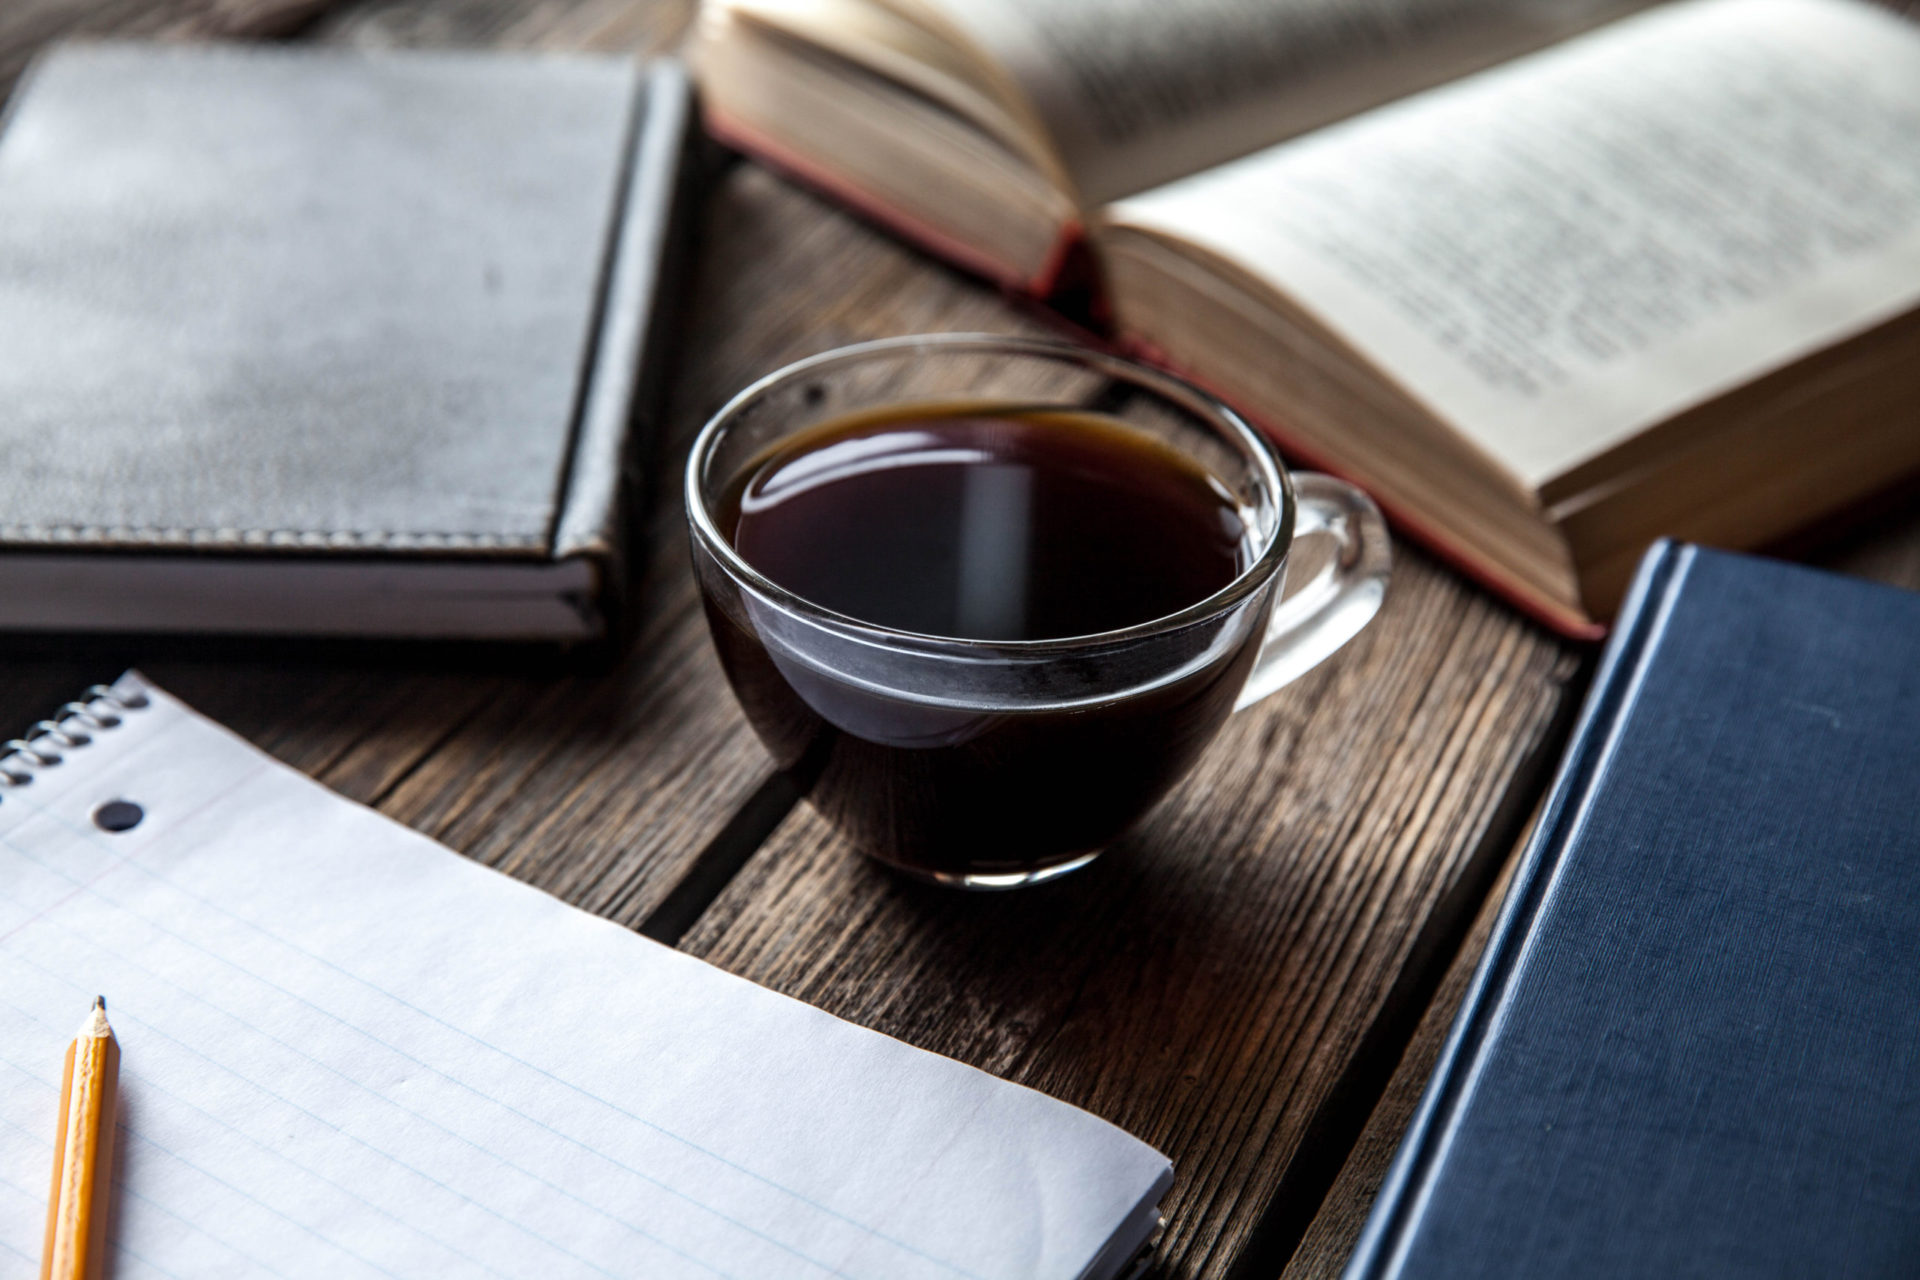 black book and a cup of coffee on a wooden background